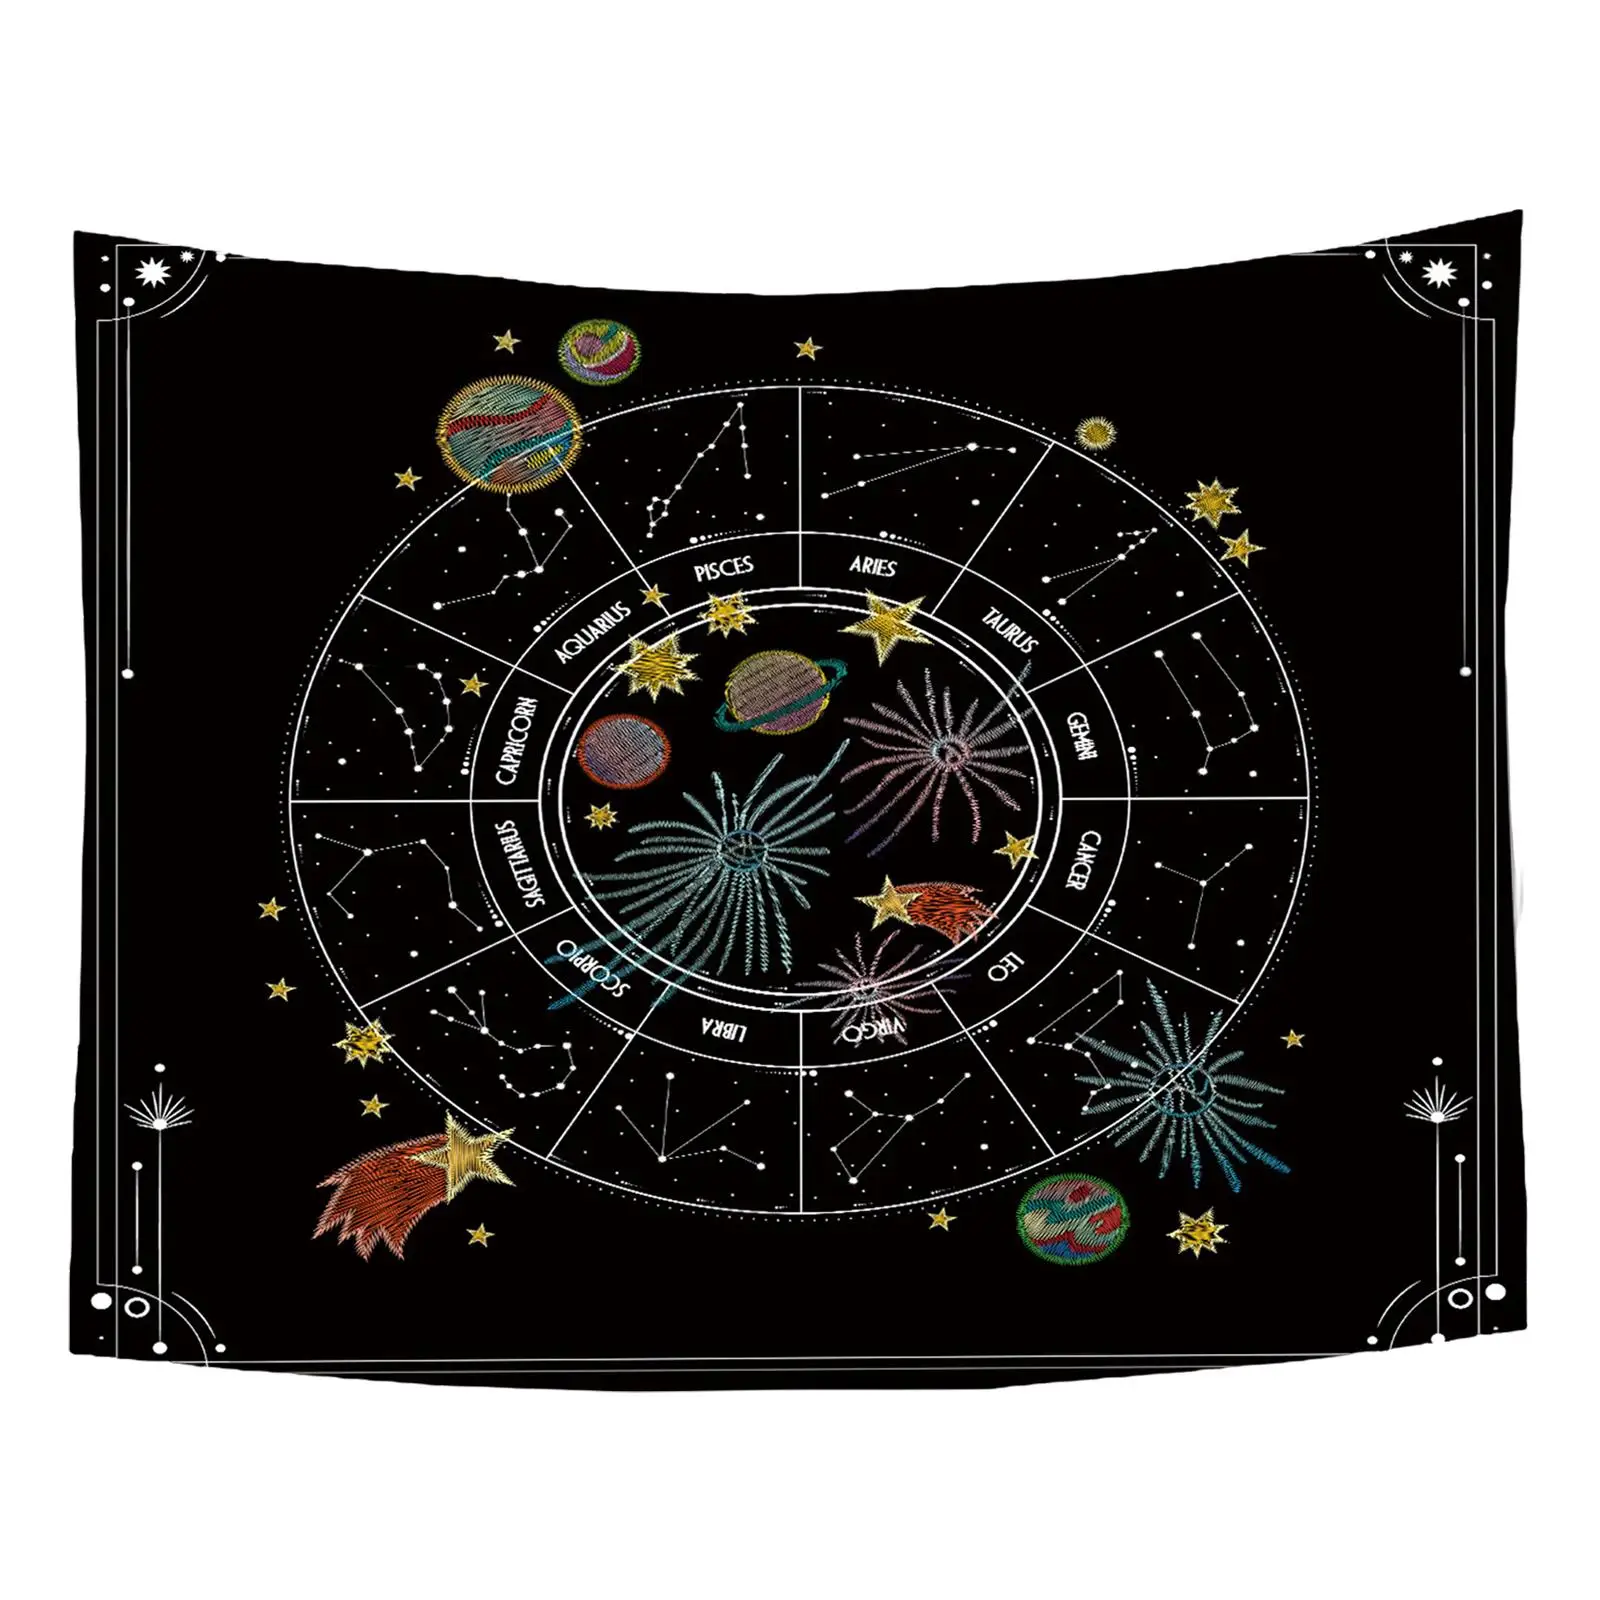 Aesthetic Bohemia Constellation Tapestry Wall Background Decoration Star Blanket for Home Decoration Hotel Bookshelf Ceiling